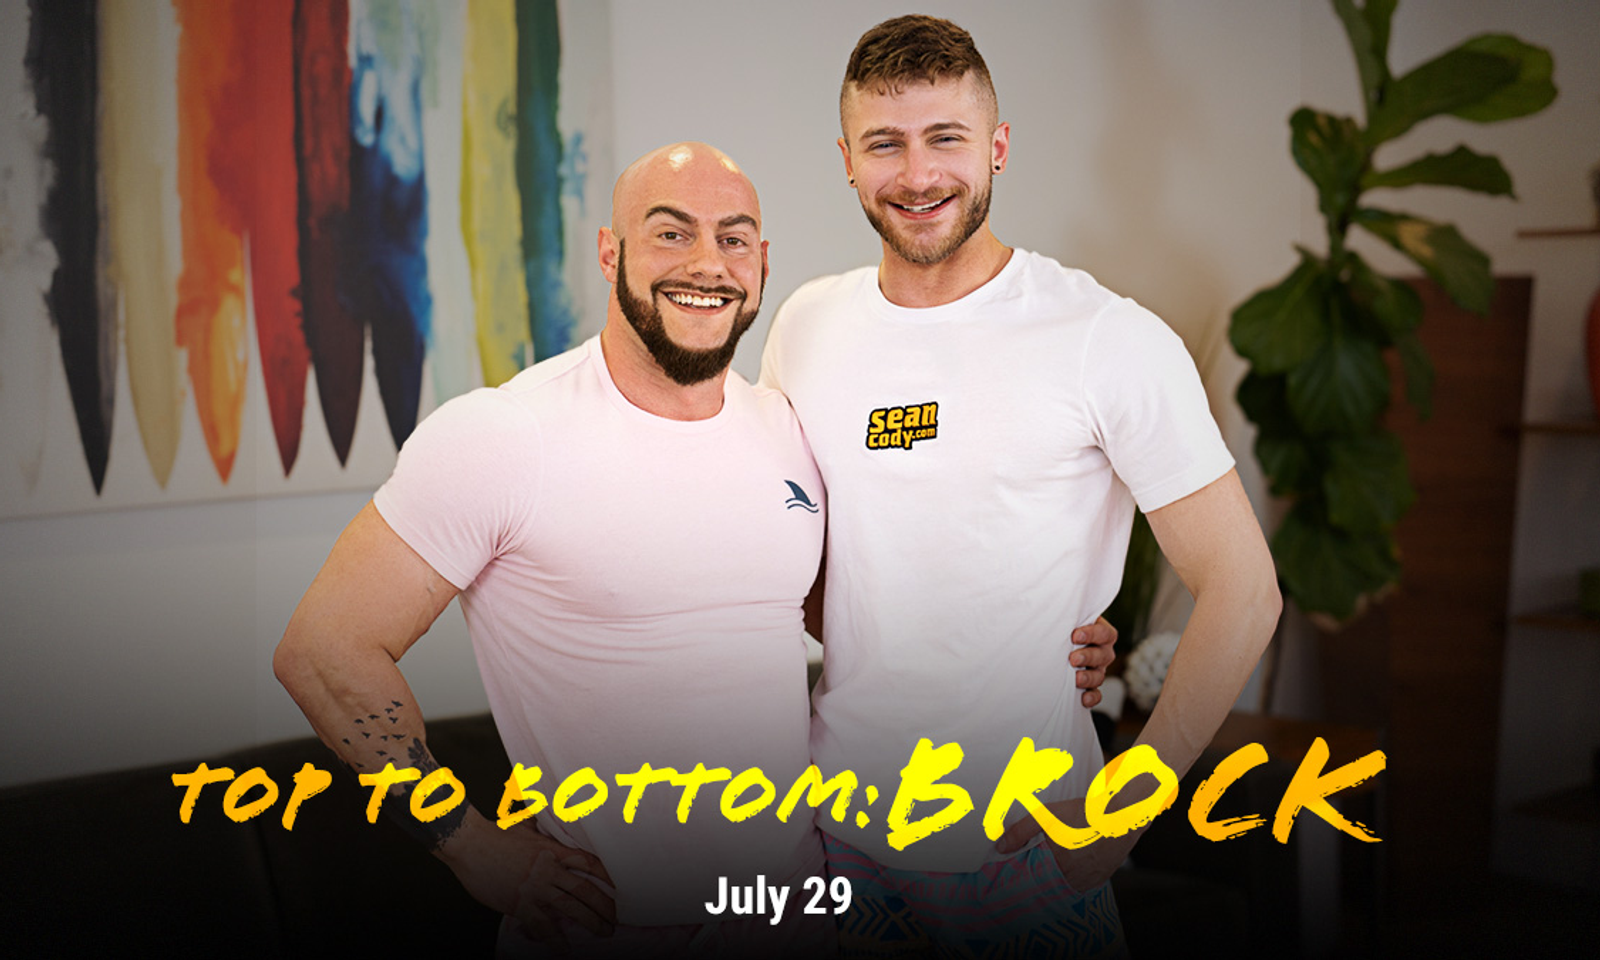 Sean Cody Star Brock Does First Bottoming Scene